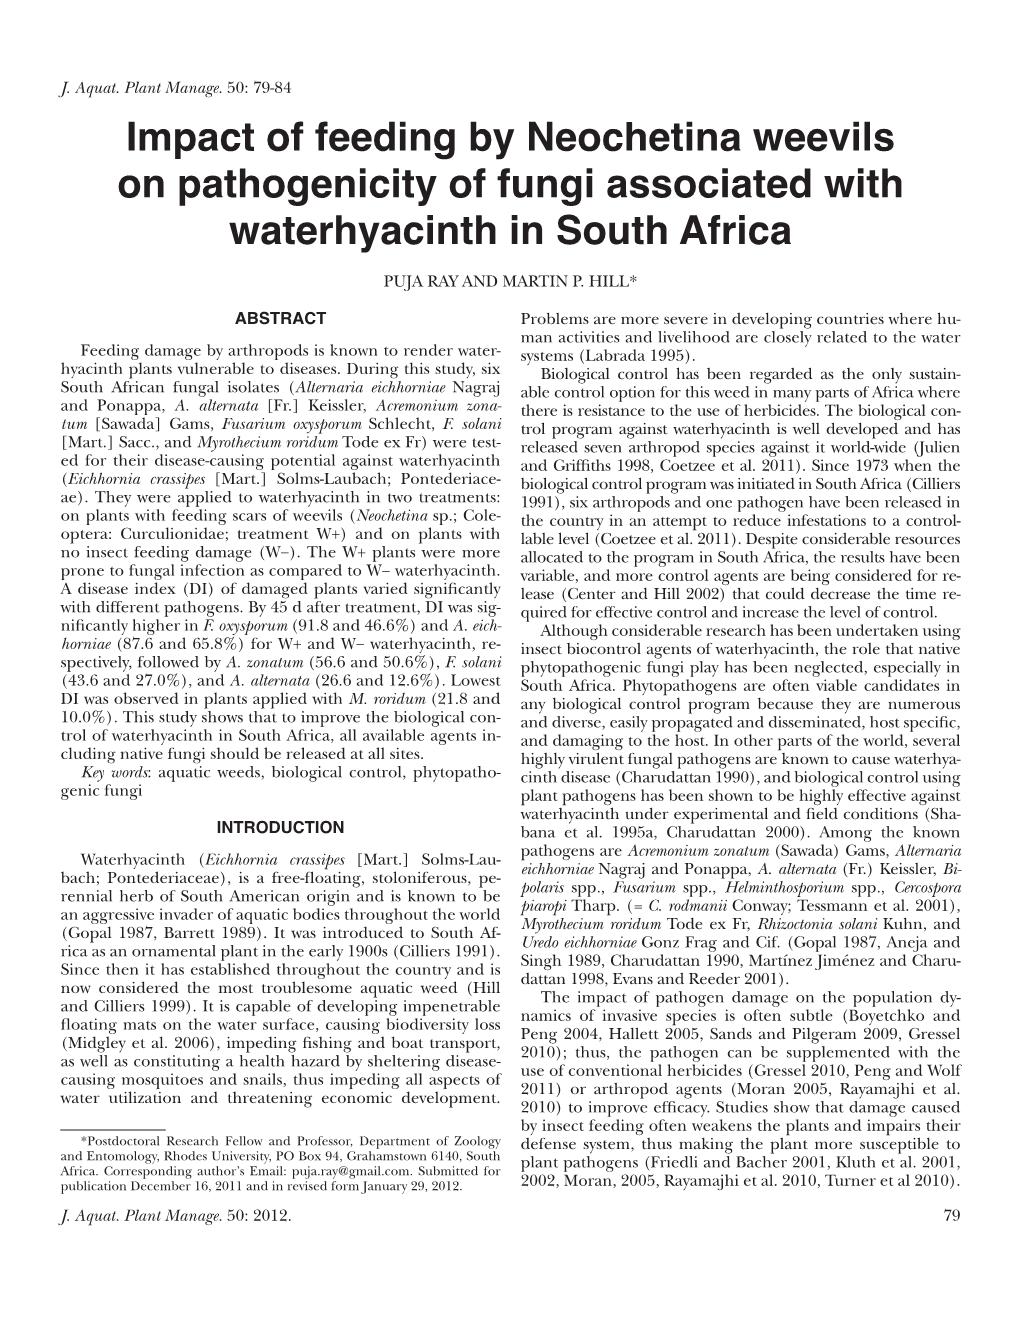 Impact of Feeding by Neochetina Weevils on Pathogenicity of Fungi Associated with Waterhyacinth in South Africa PUJA RAY and MARTIN P